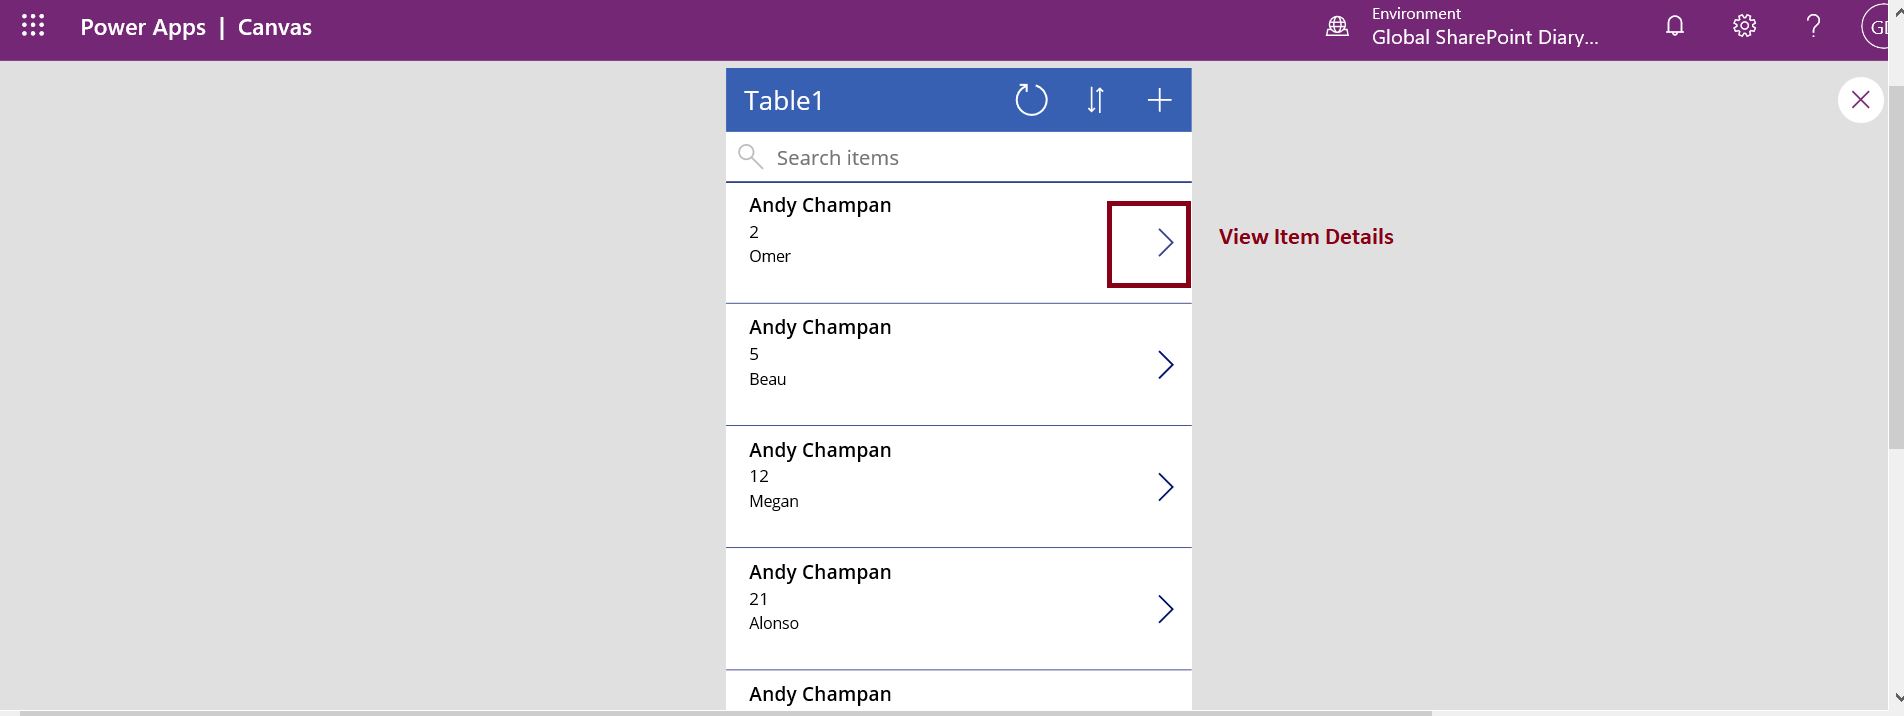 View Item Details button in PowerApps model driven app